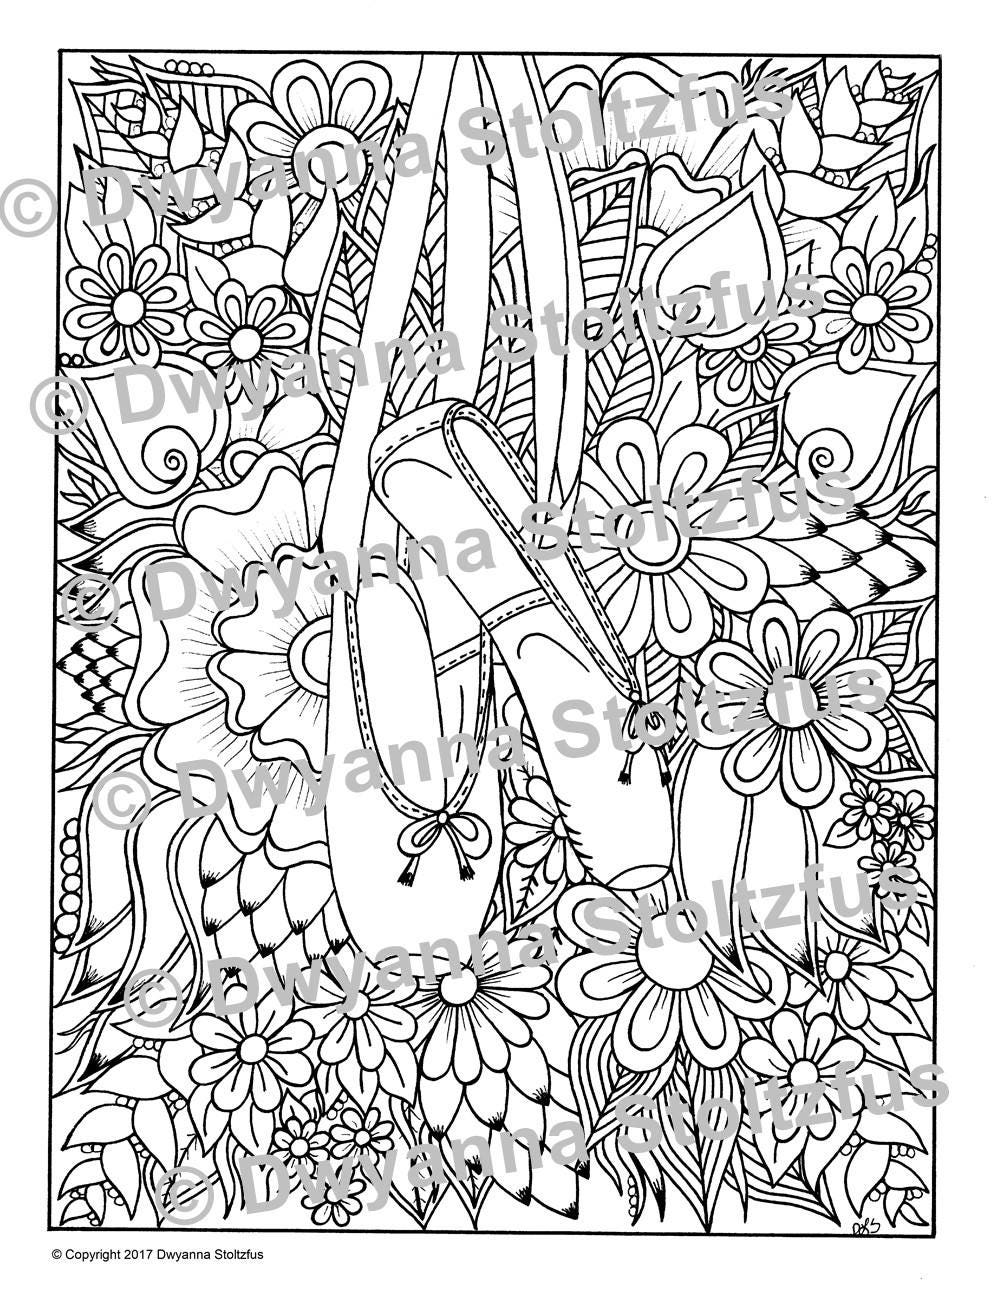 Download Hanging Ballet Shoes Coloring Page JPG